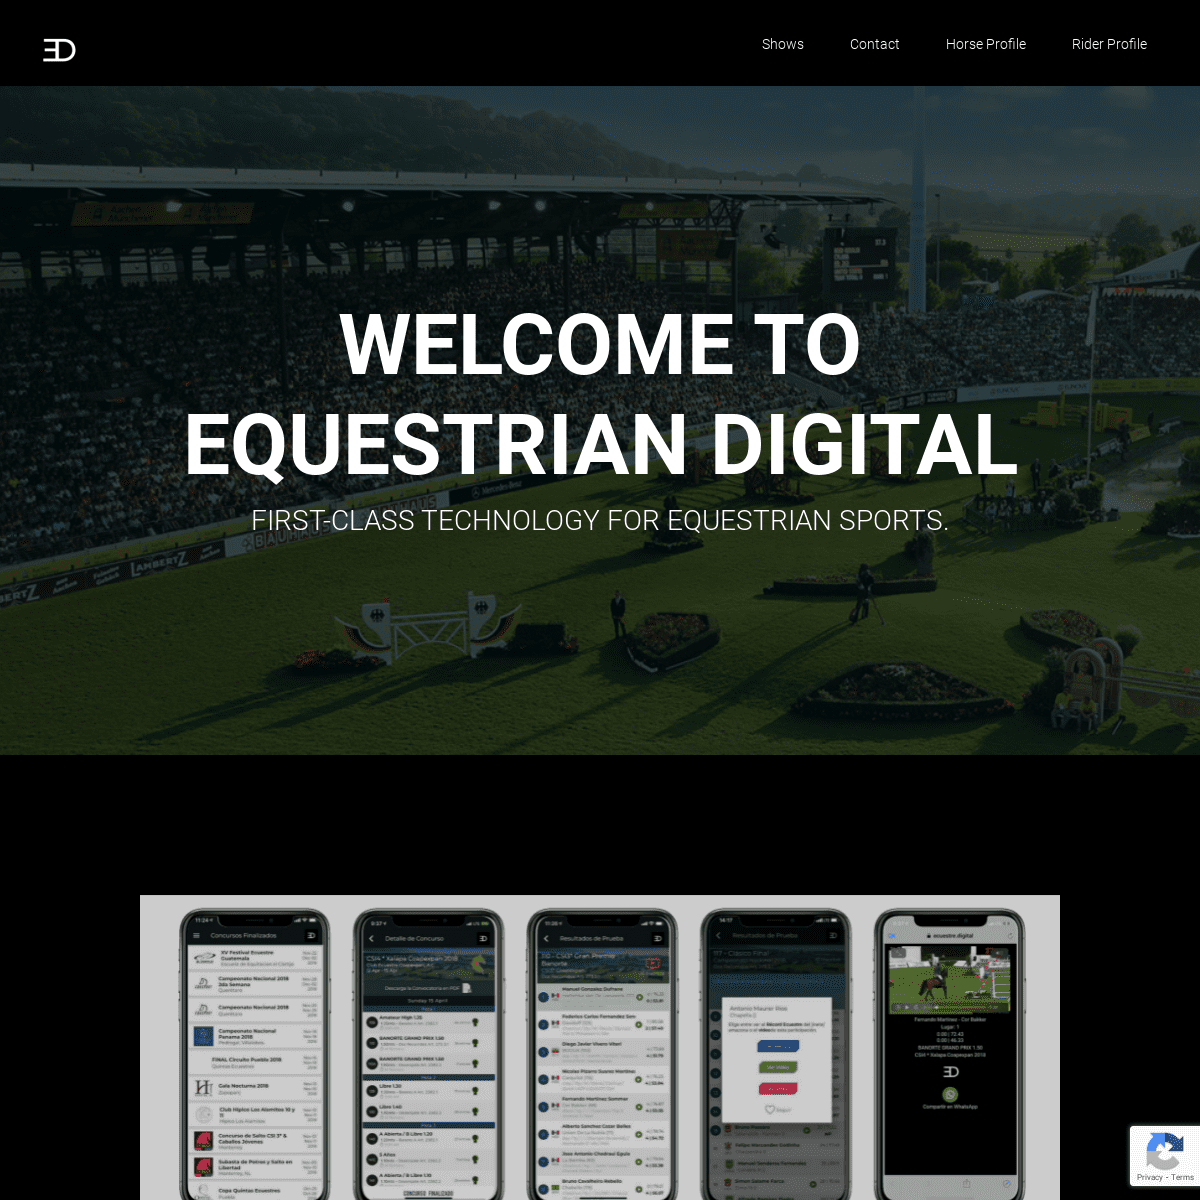 A complete backup of https://equestrian.digital